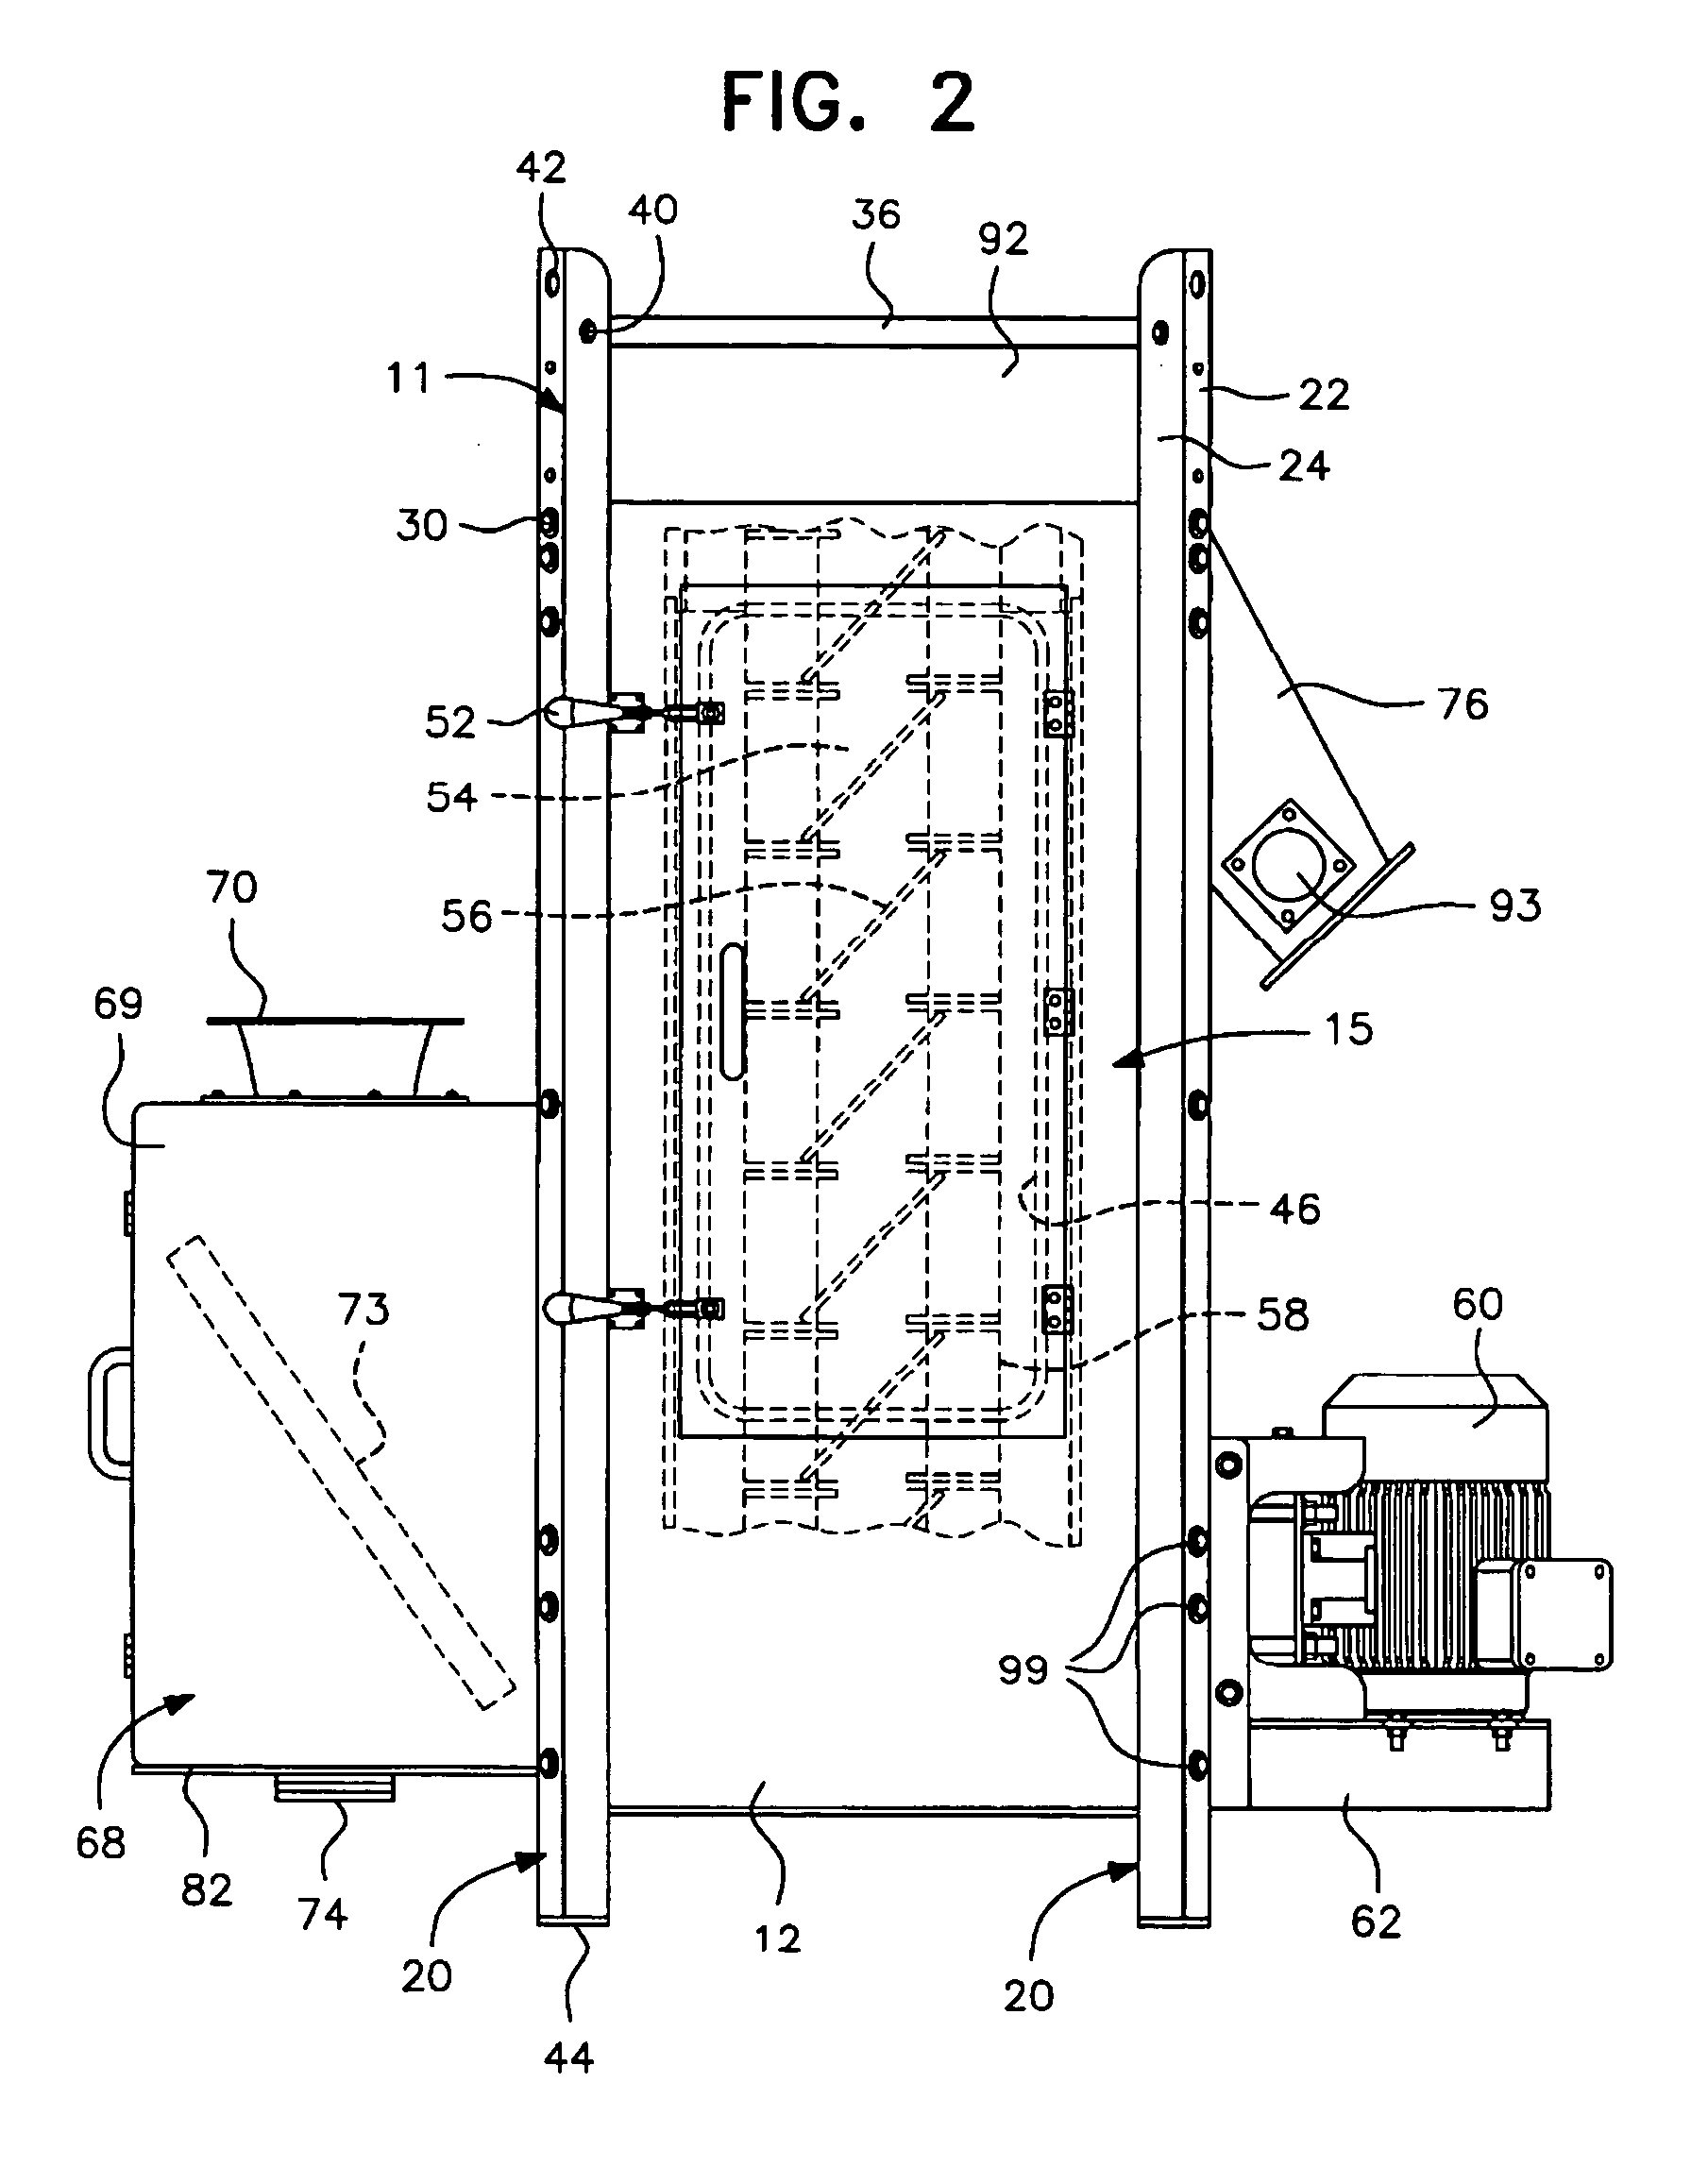 Centrifugal pellet dryer with plastic wall panels